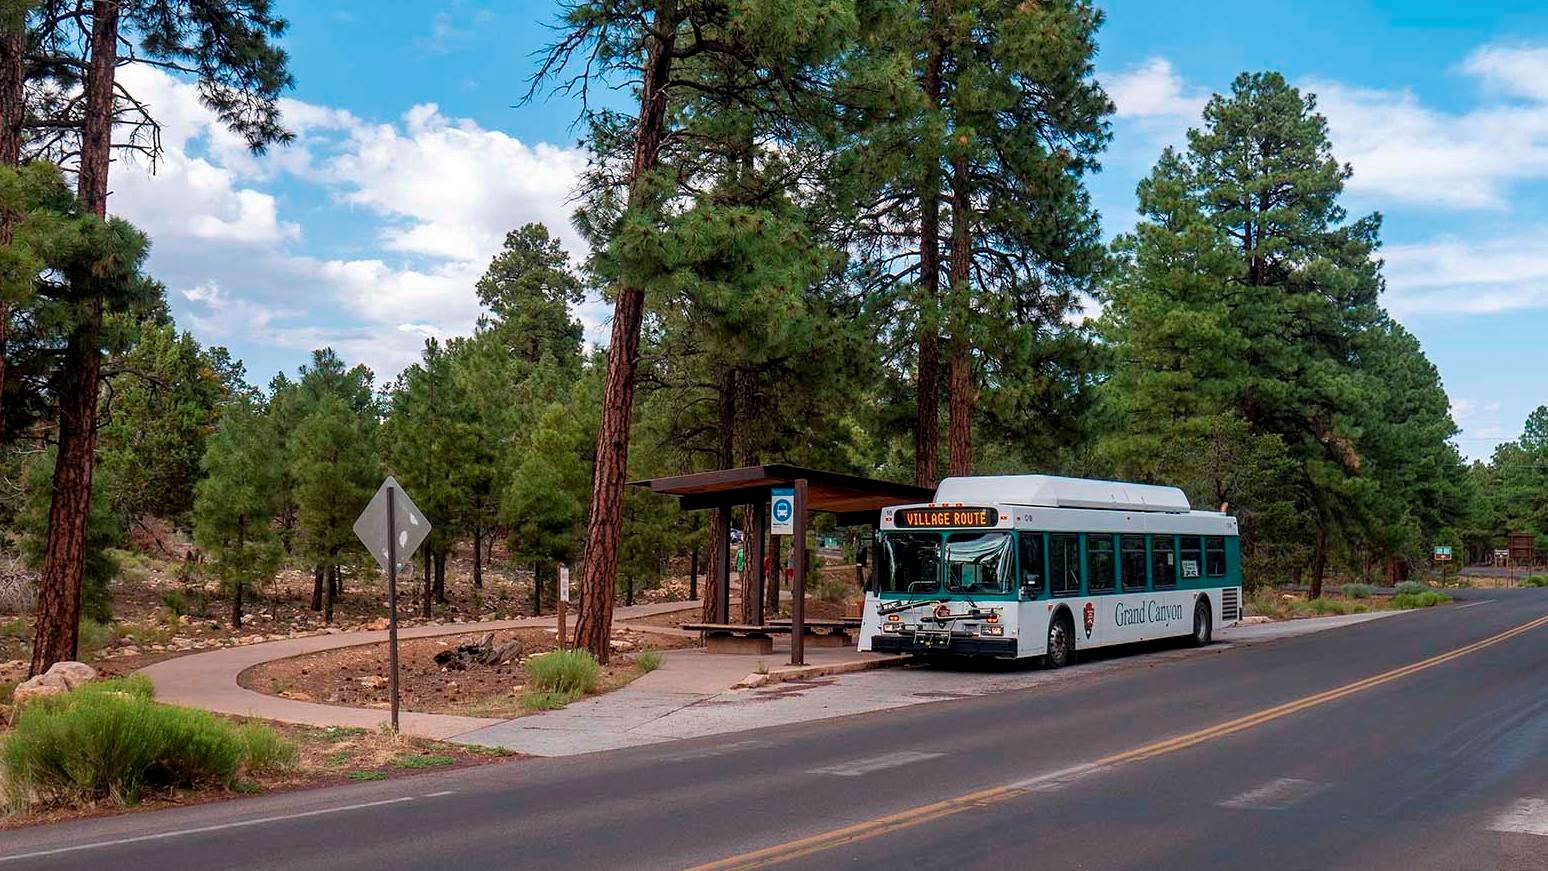 A white and green shuttle bus by a small bus stop shade structure under tall ponderosa pines